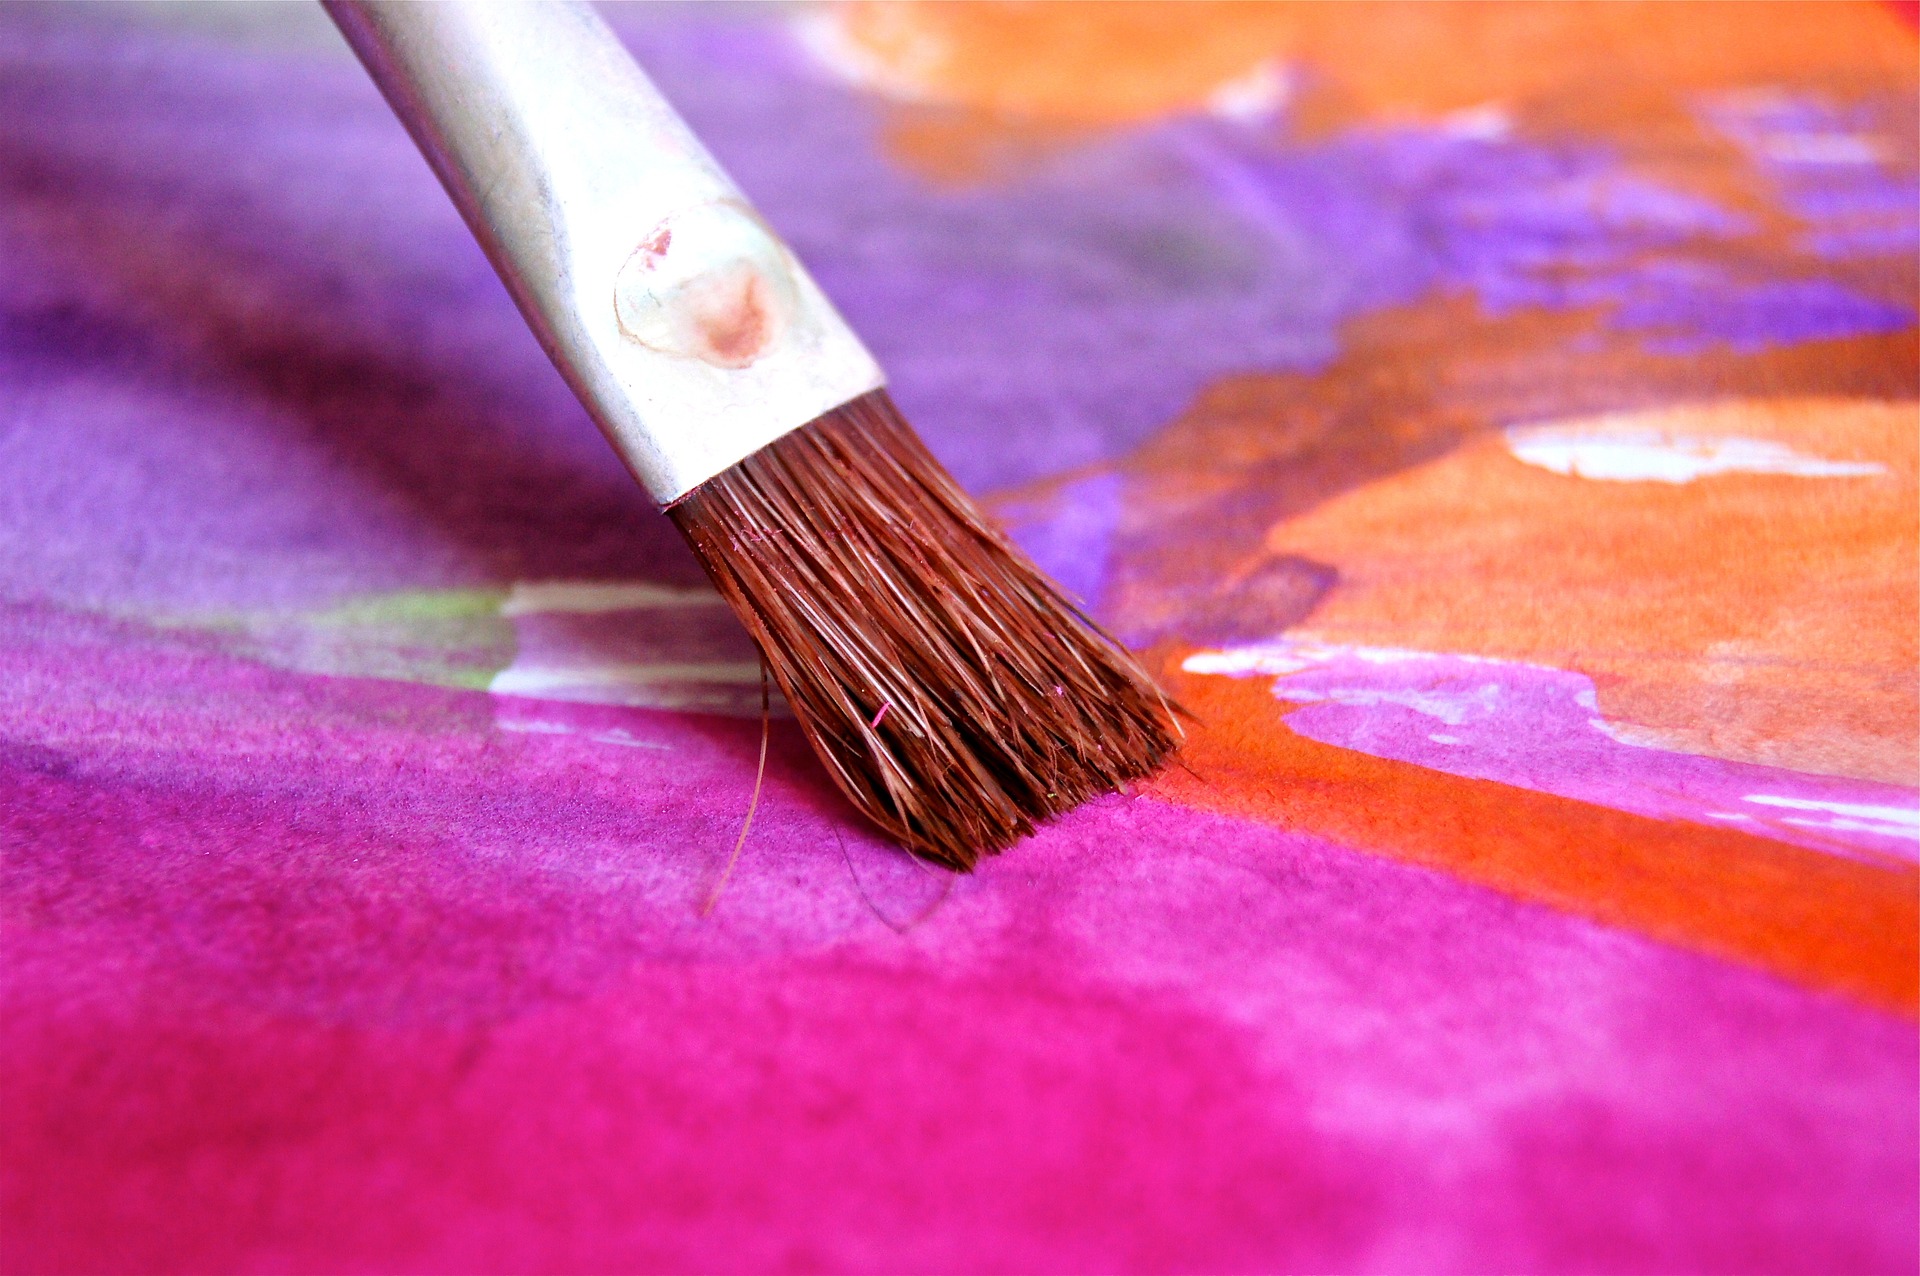 A closeup shot of a paintbrush on an easel painting oranges and pinks